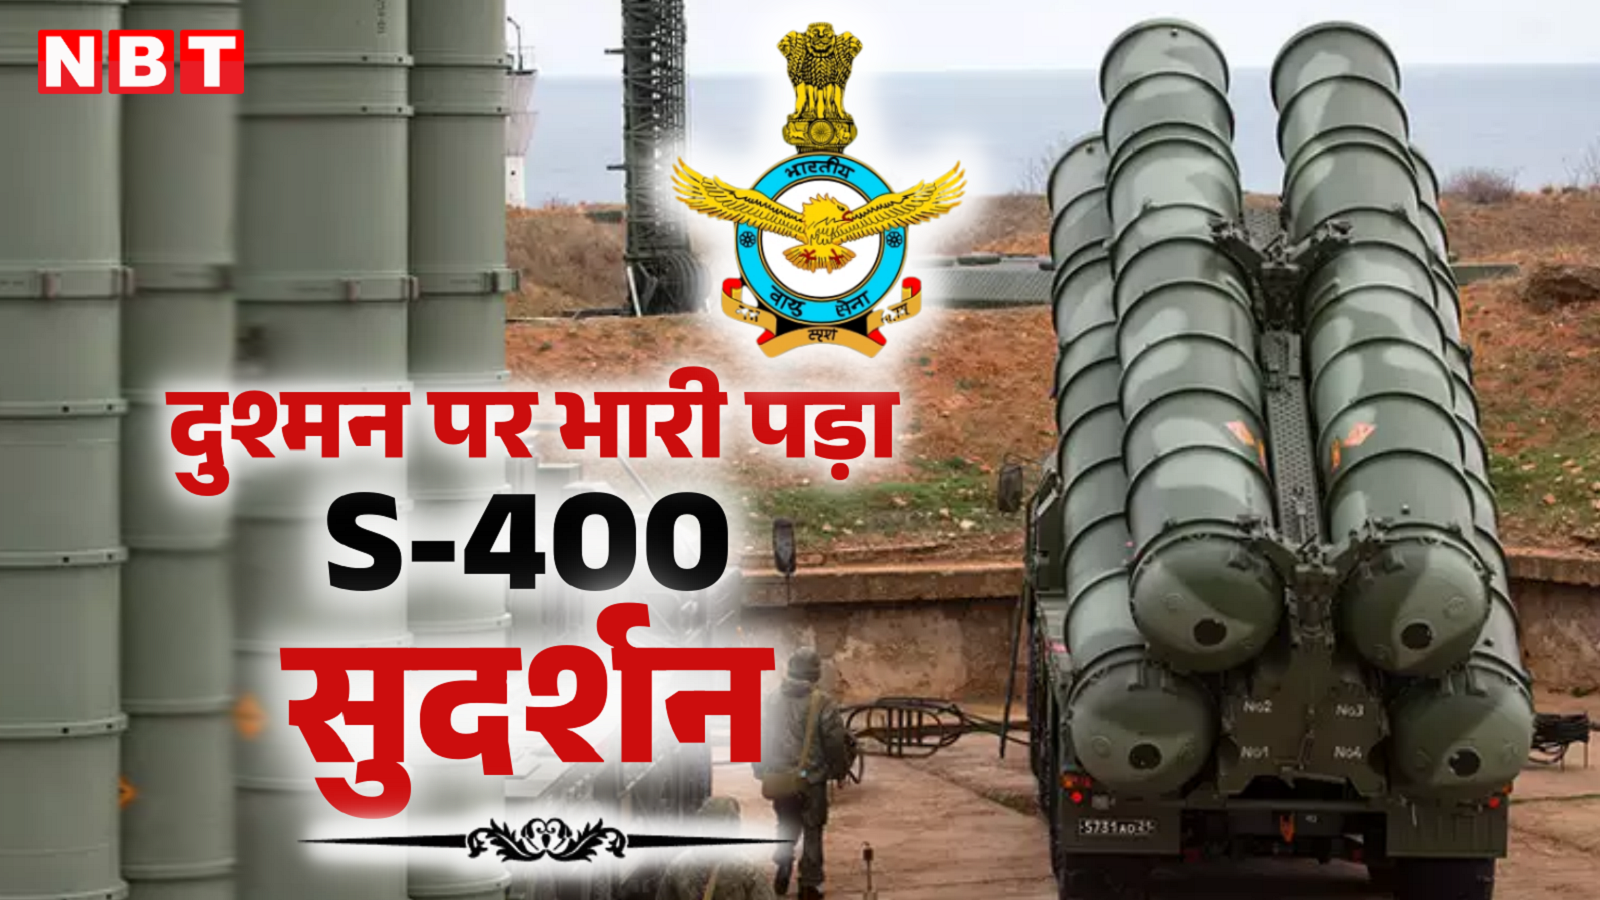 S-400 'Sudarshan' showed its power, Air Force's enthusiasm increased after seeing the 'enemy' being wiped out